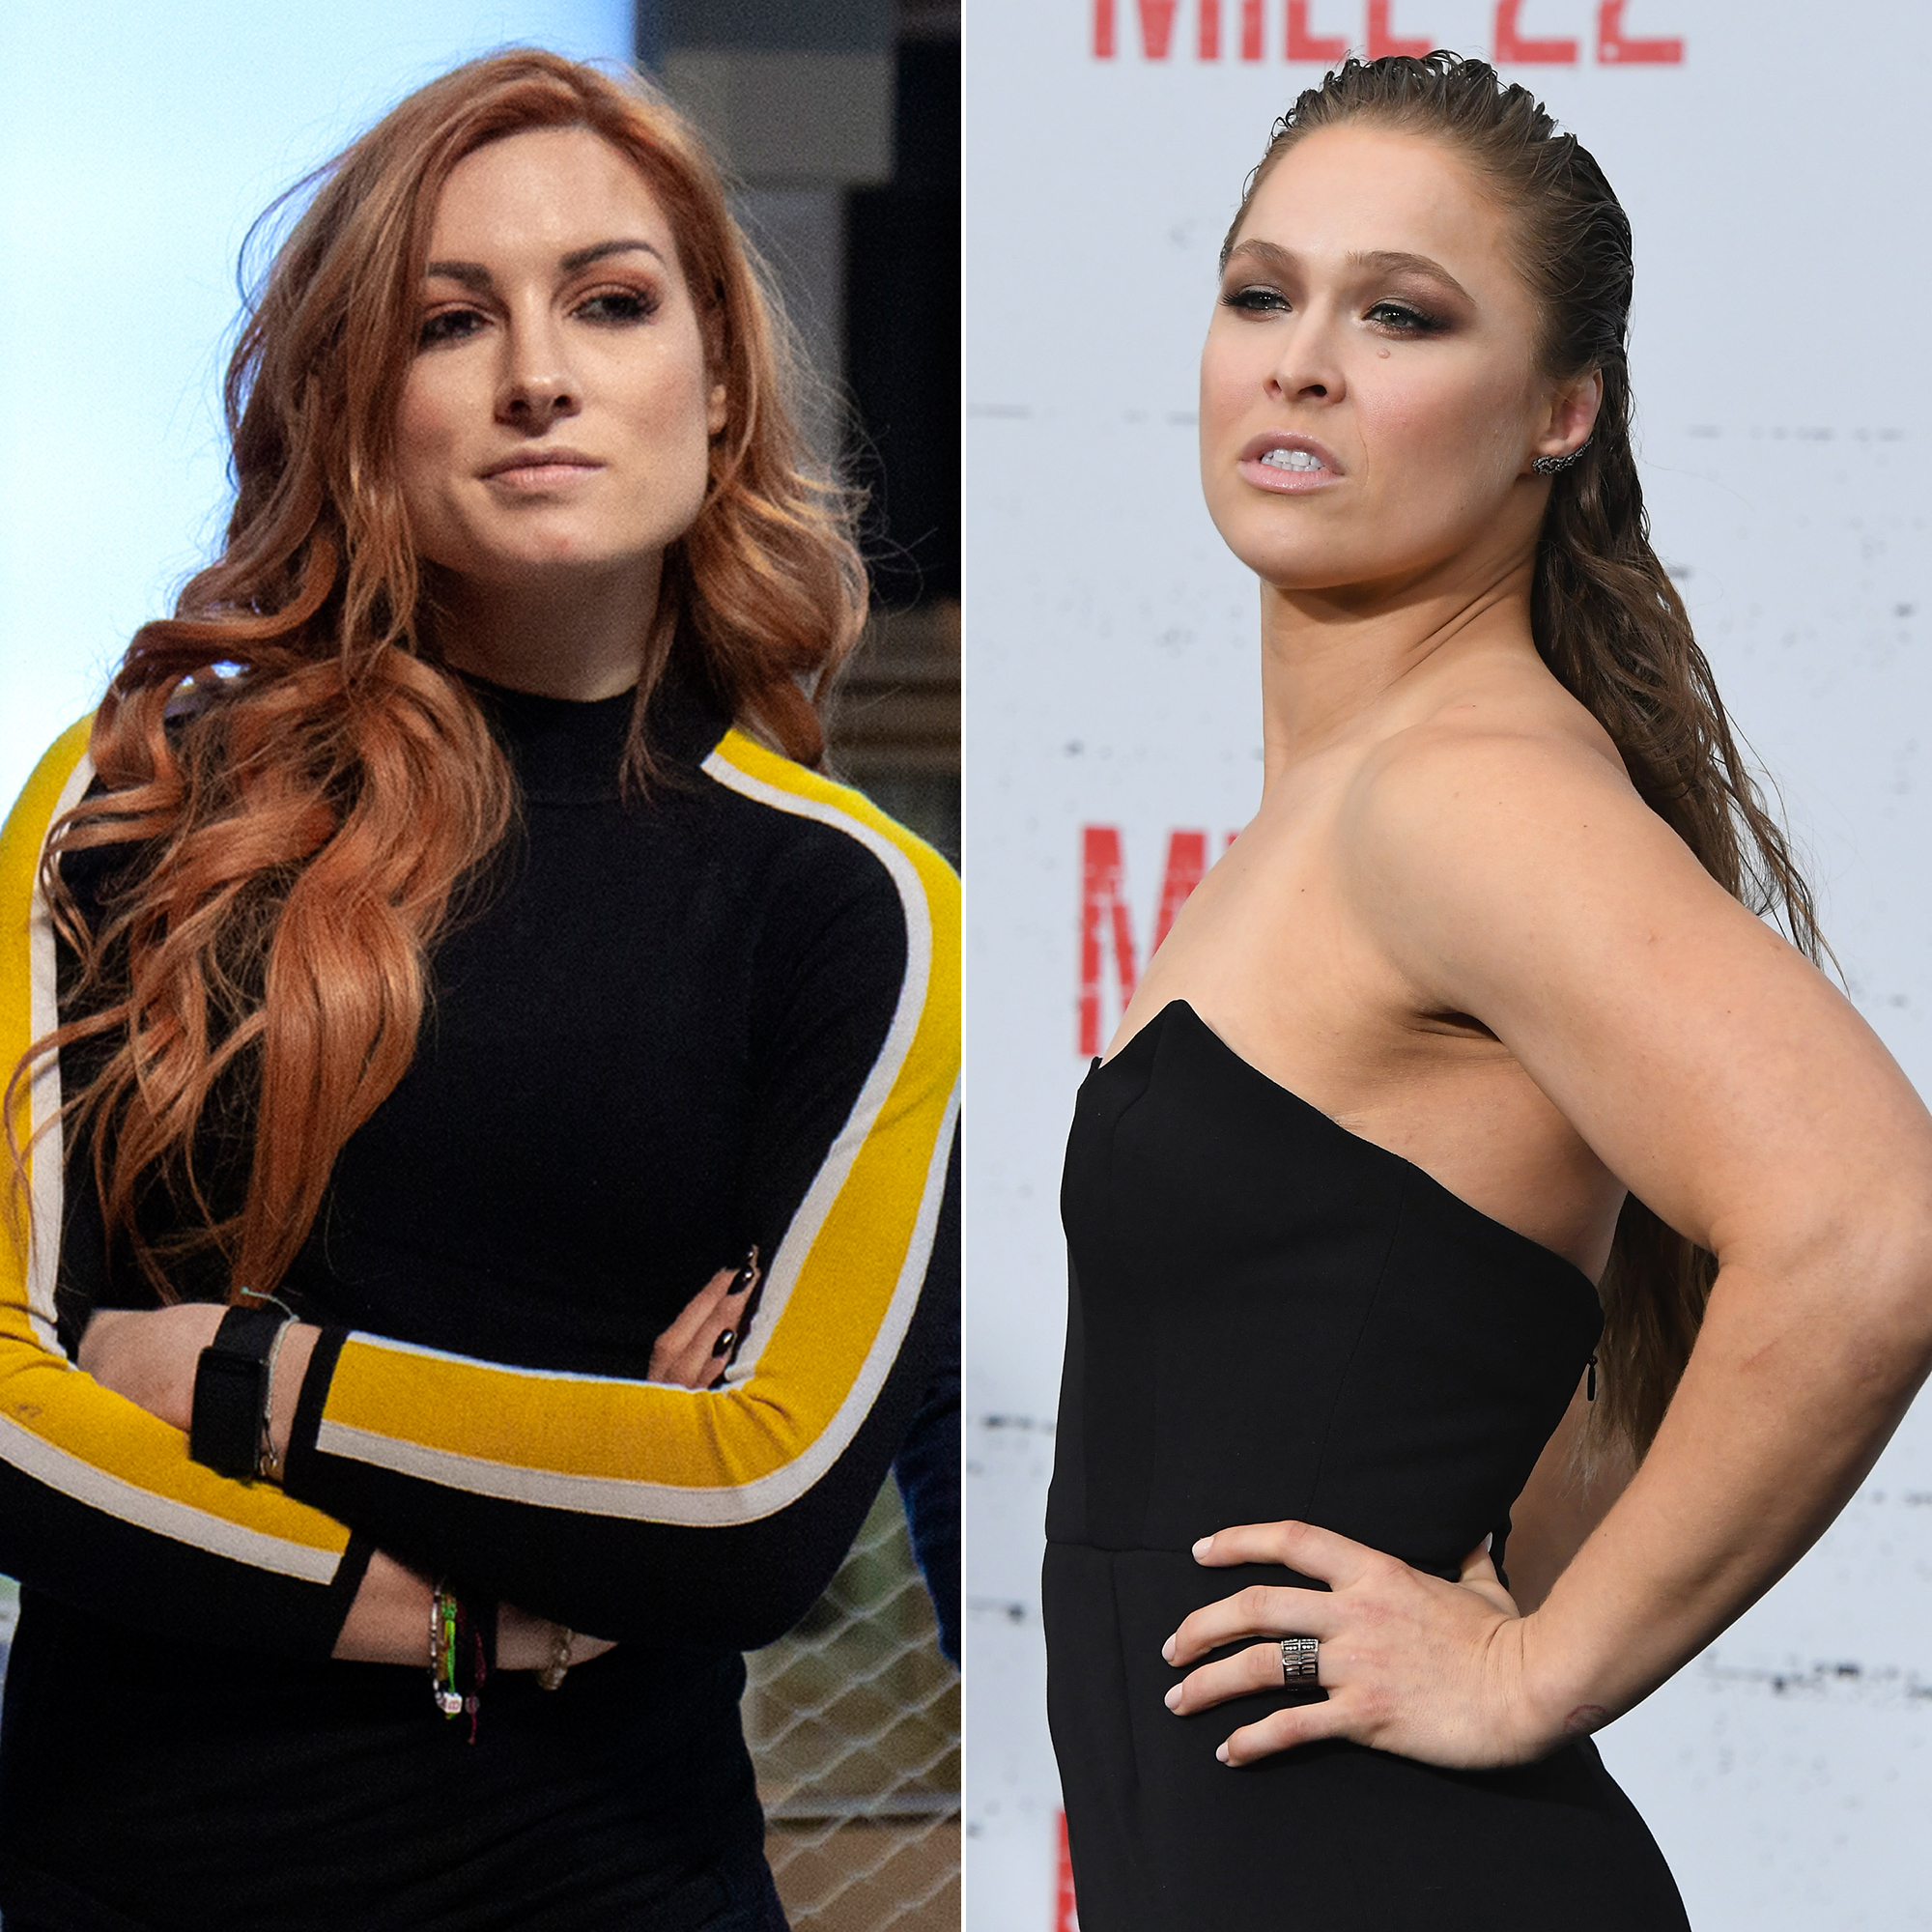 WWE Not Thrilled with Language Used in Ronda Rousey/Becky Lynch